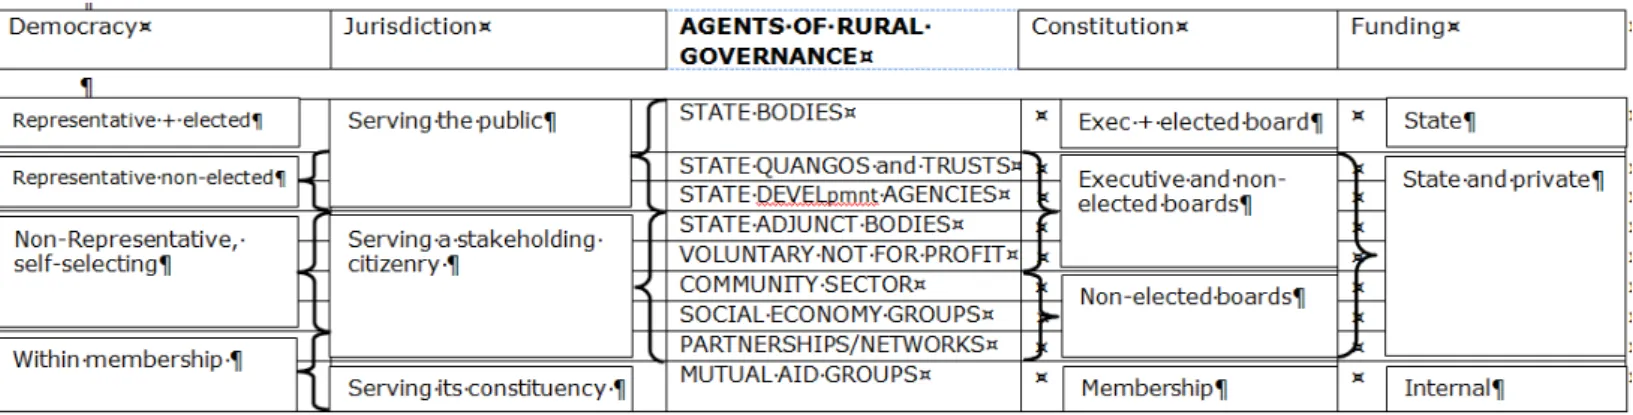 Figure 1 – Characteristics of the agents of rural governance